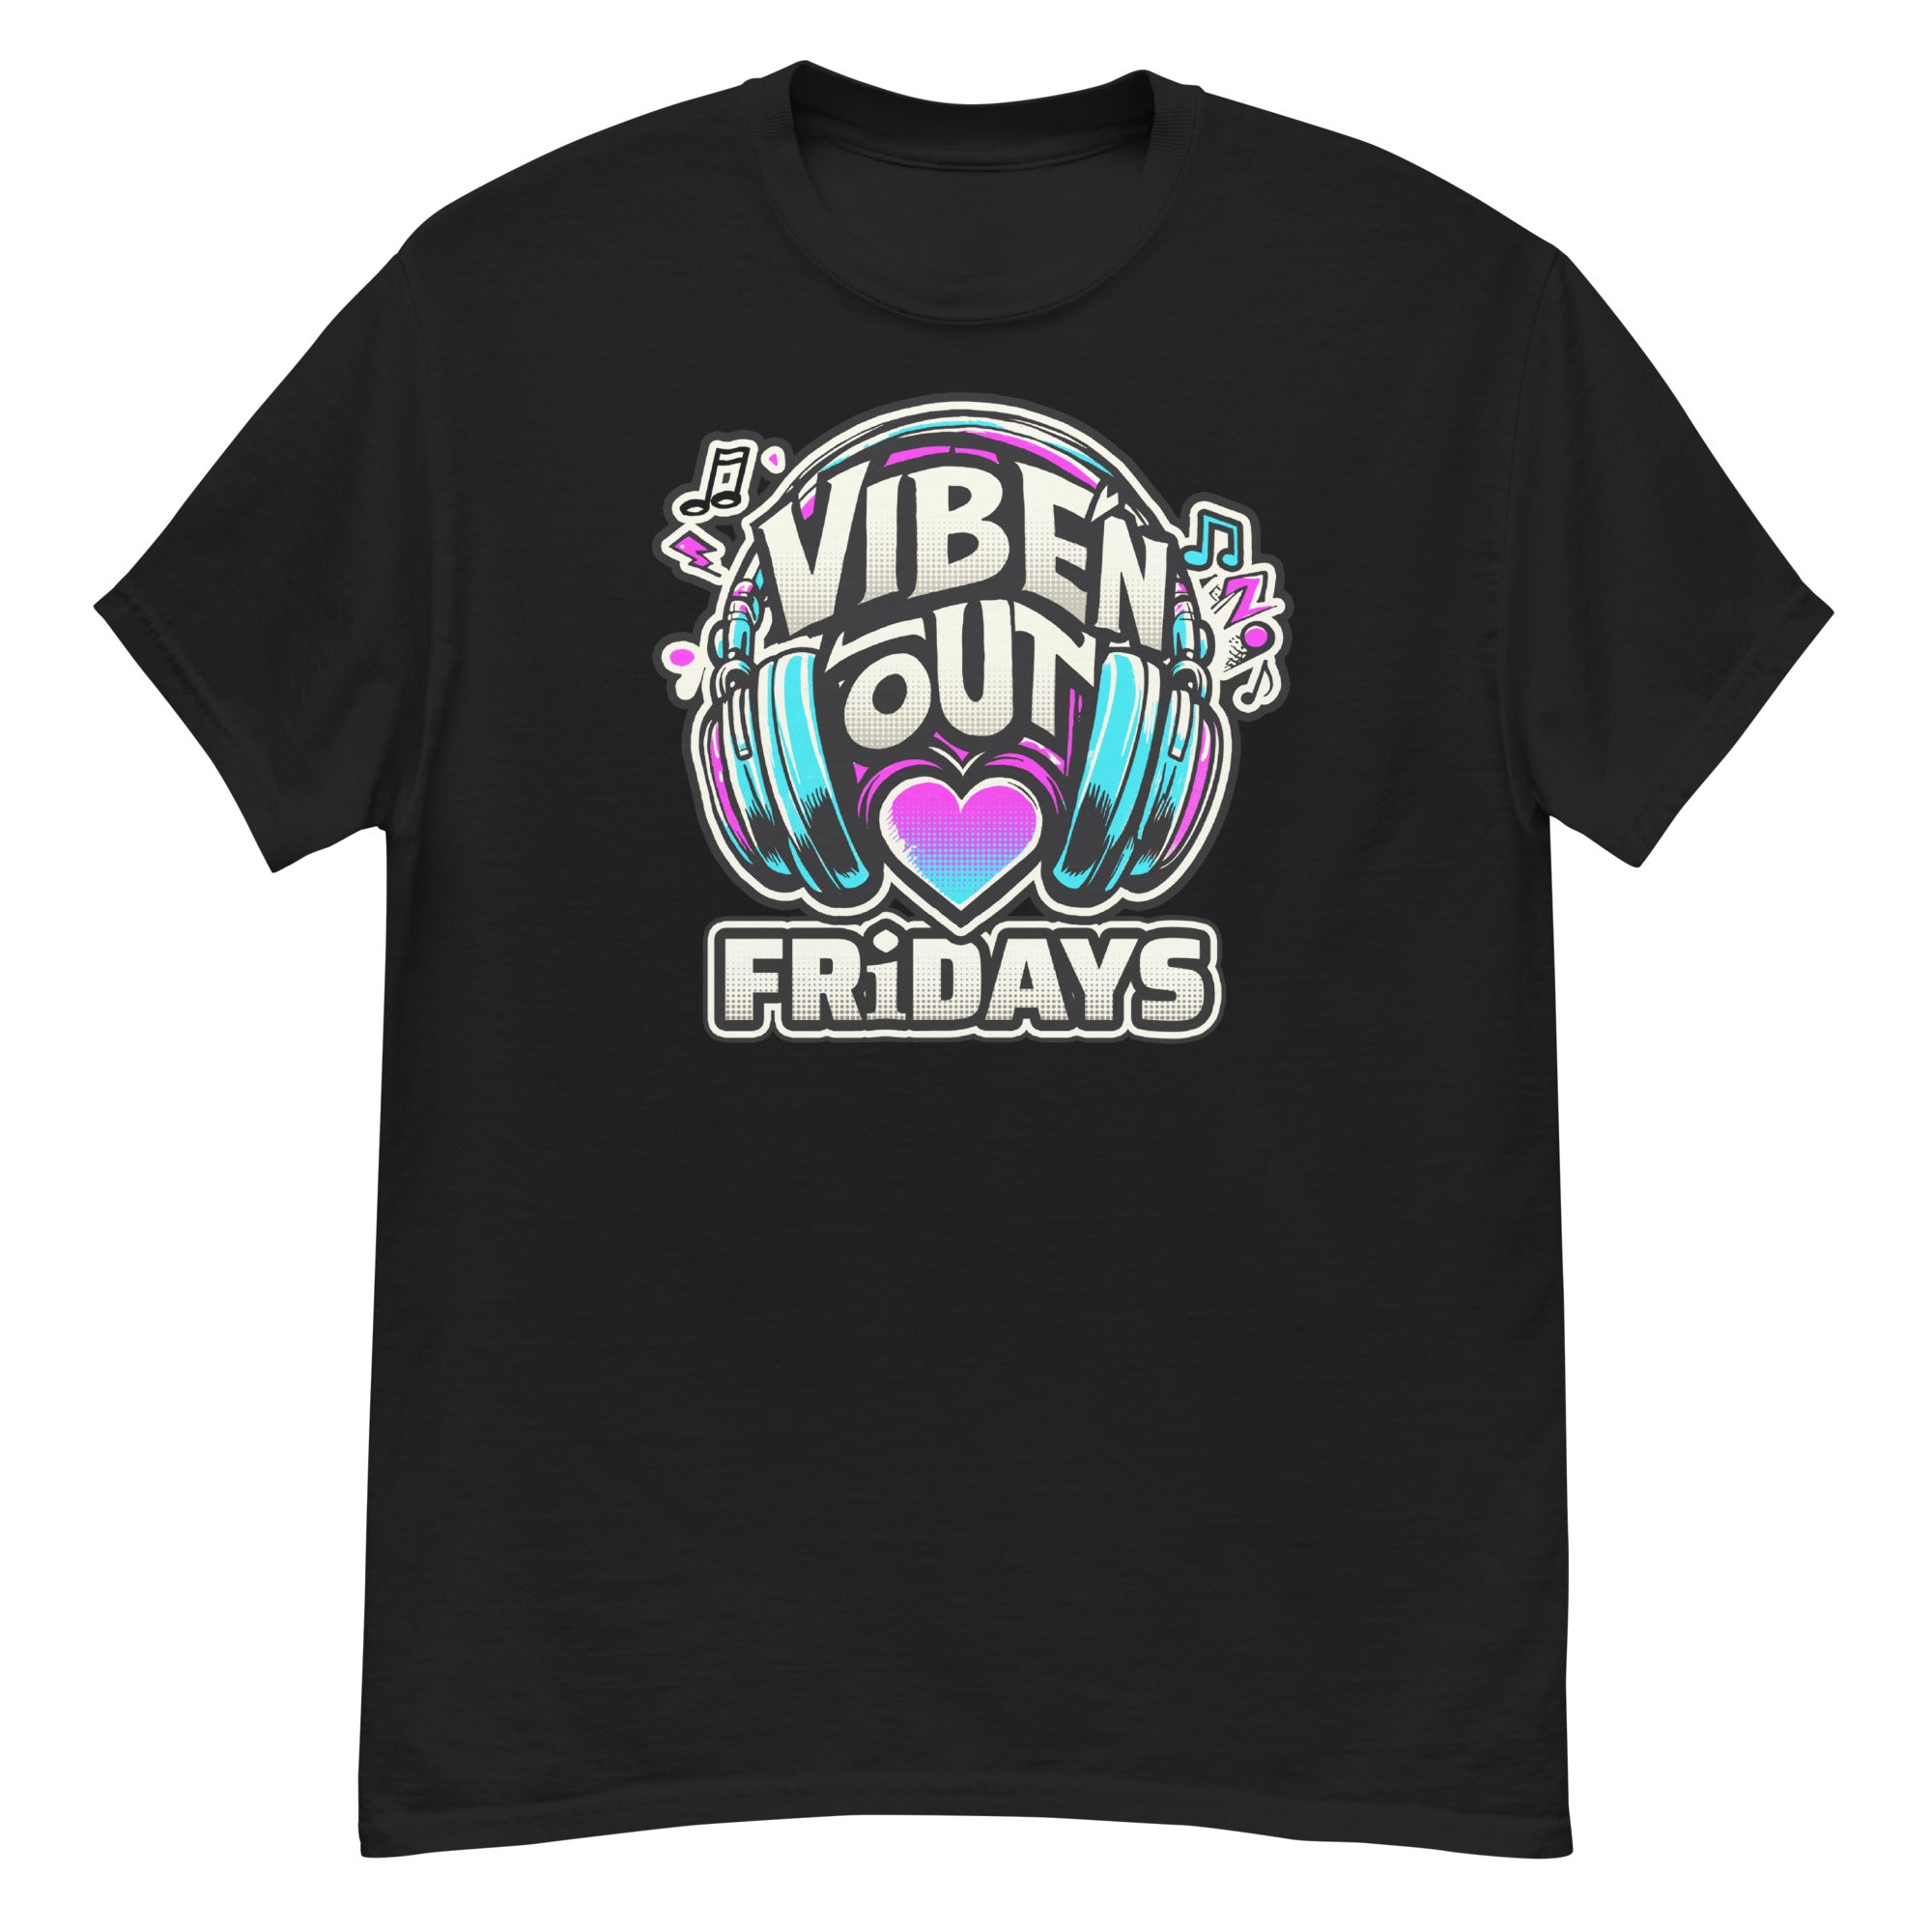 VIBE 'N OUT FRIDAYS - Men's classic tee - Beats 4 Hope